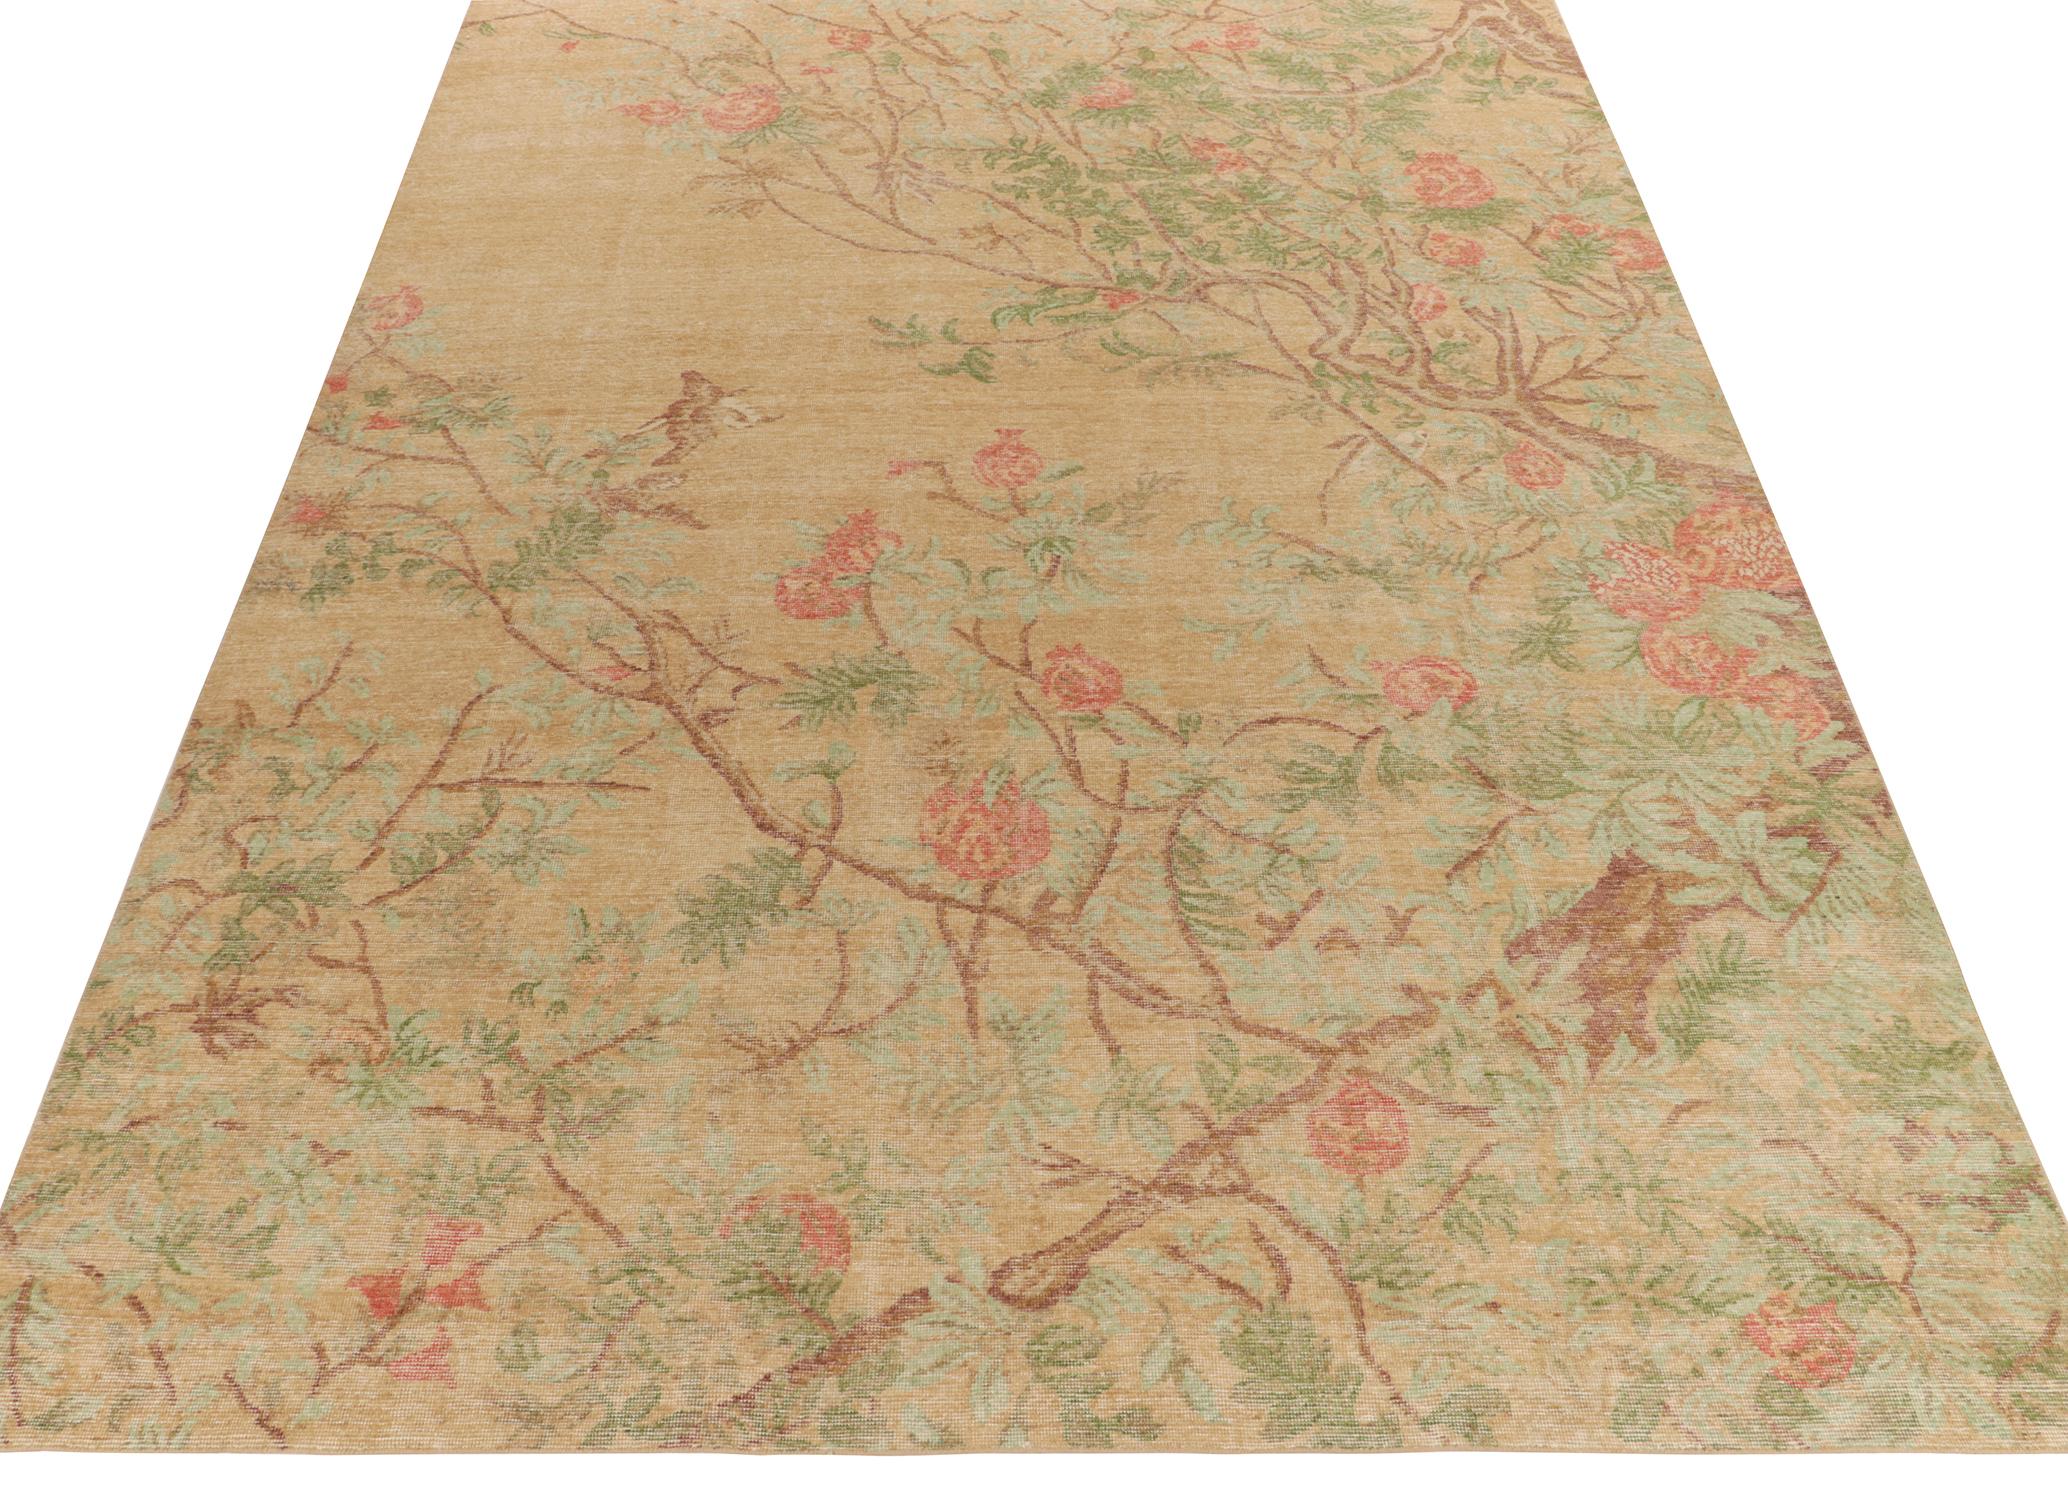 Modern Rug & Kilim's Distressed Style Rug in Golden-Brown, Green & Red Floral Pattern For Sale